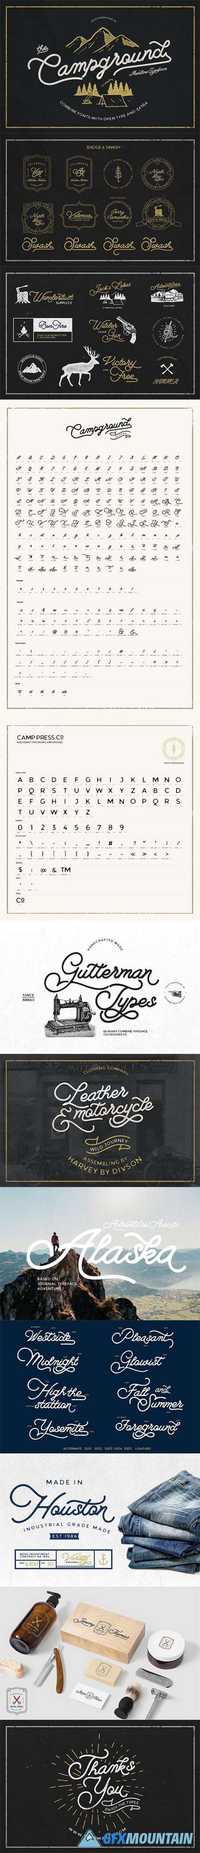 Campground Font Combinations